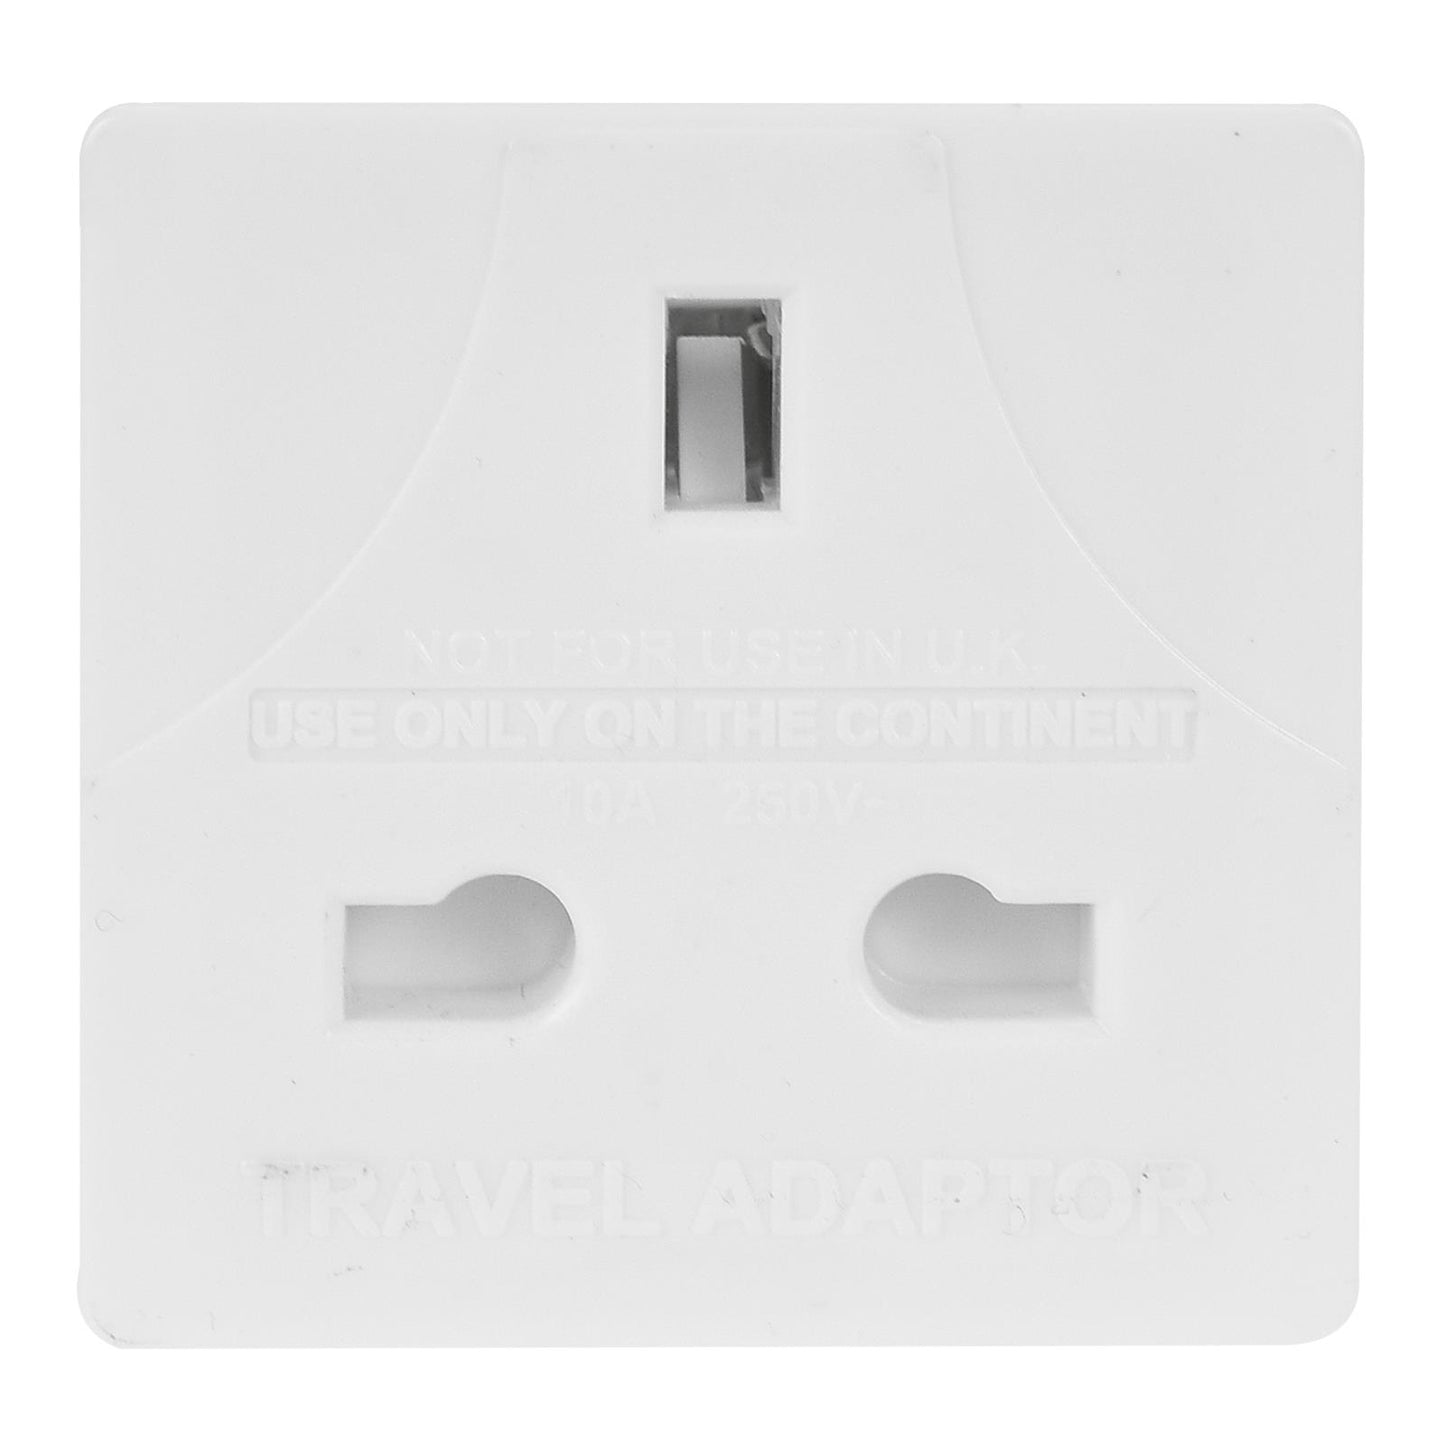 Stay Connected on Your Euro Trip with Travel Adaptor